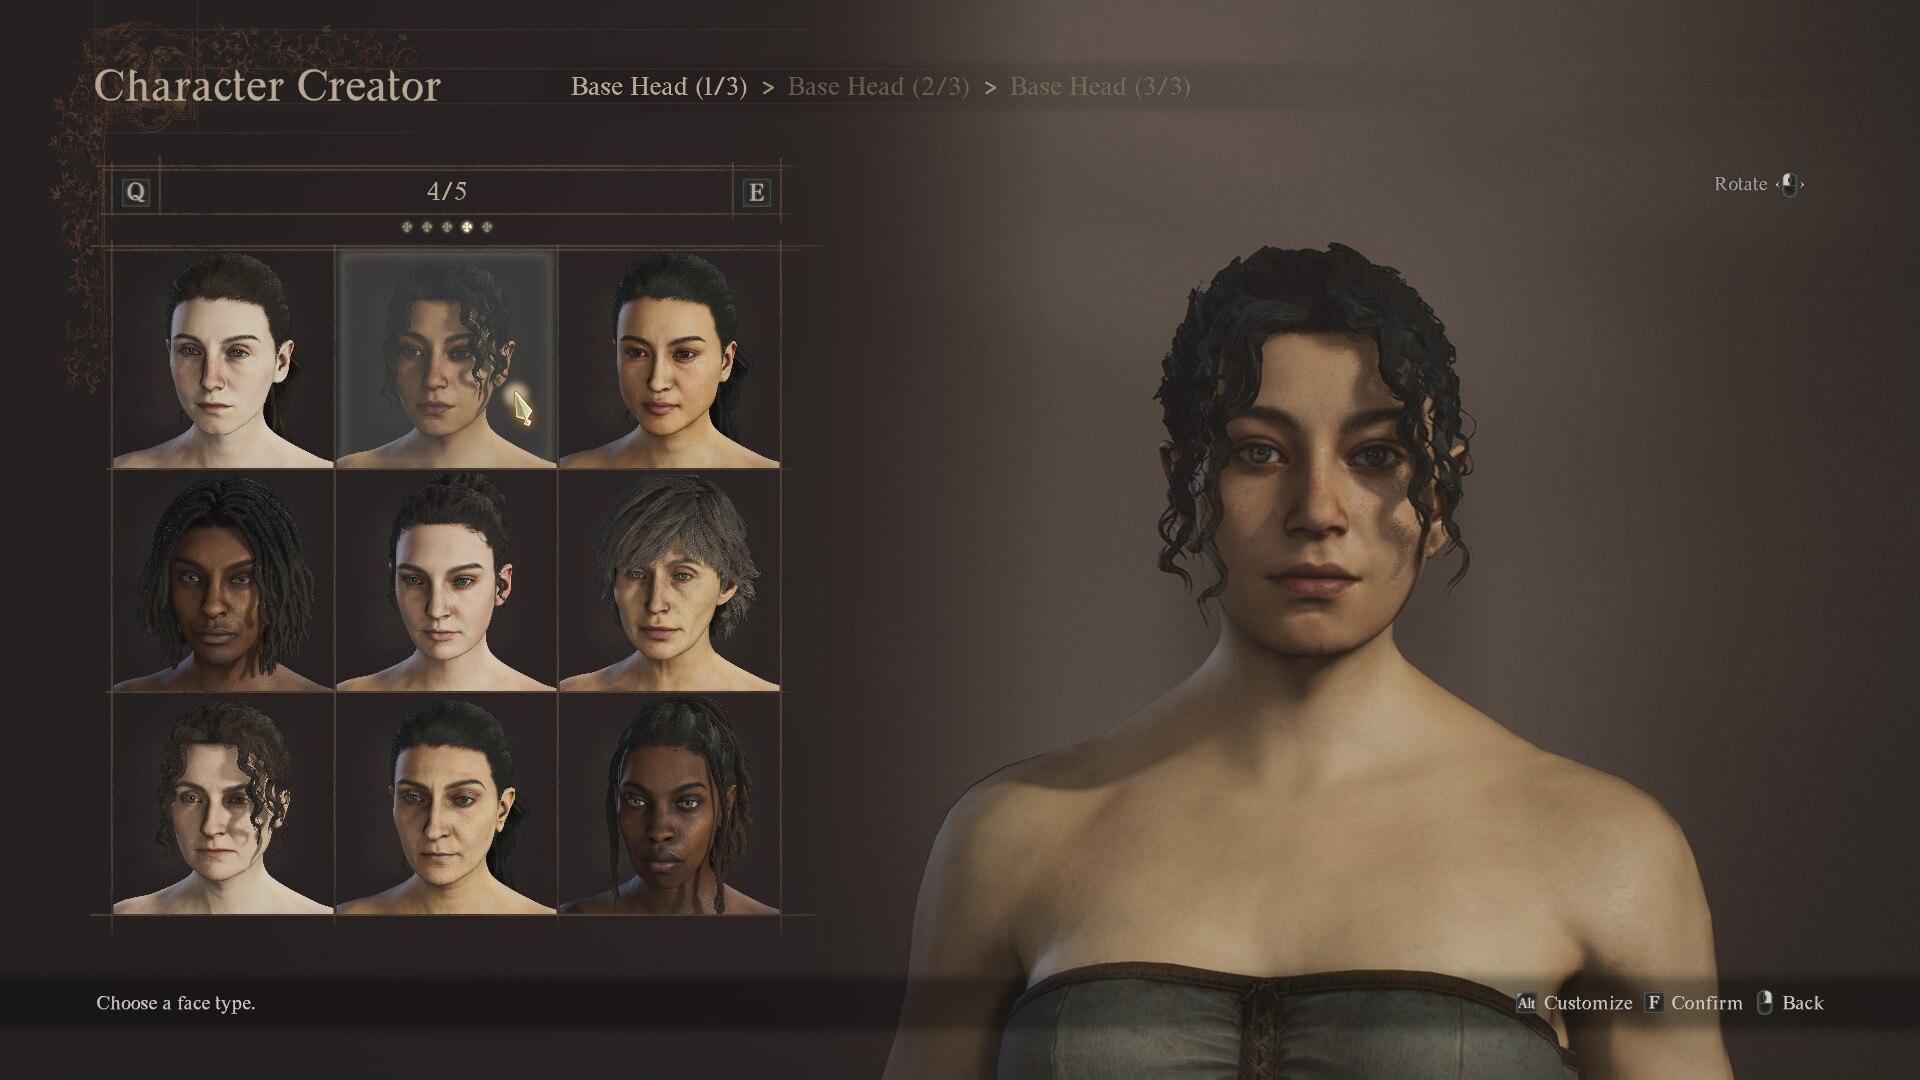 Dragon's Dogma 2 character creation selecting a woman's facial features